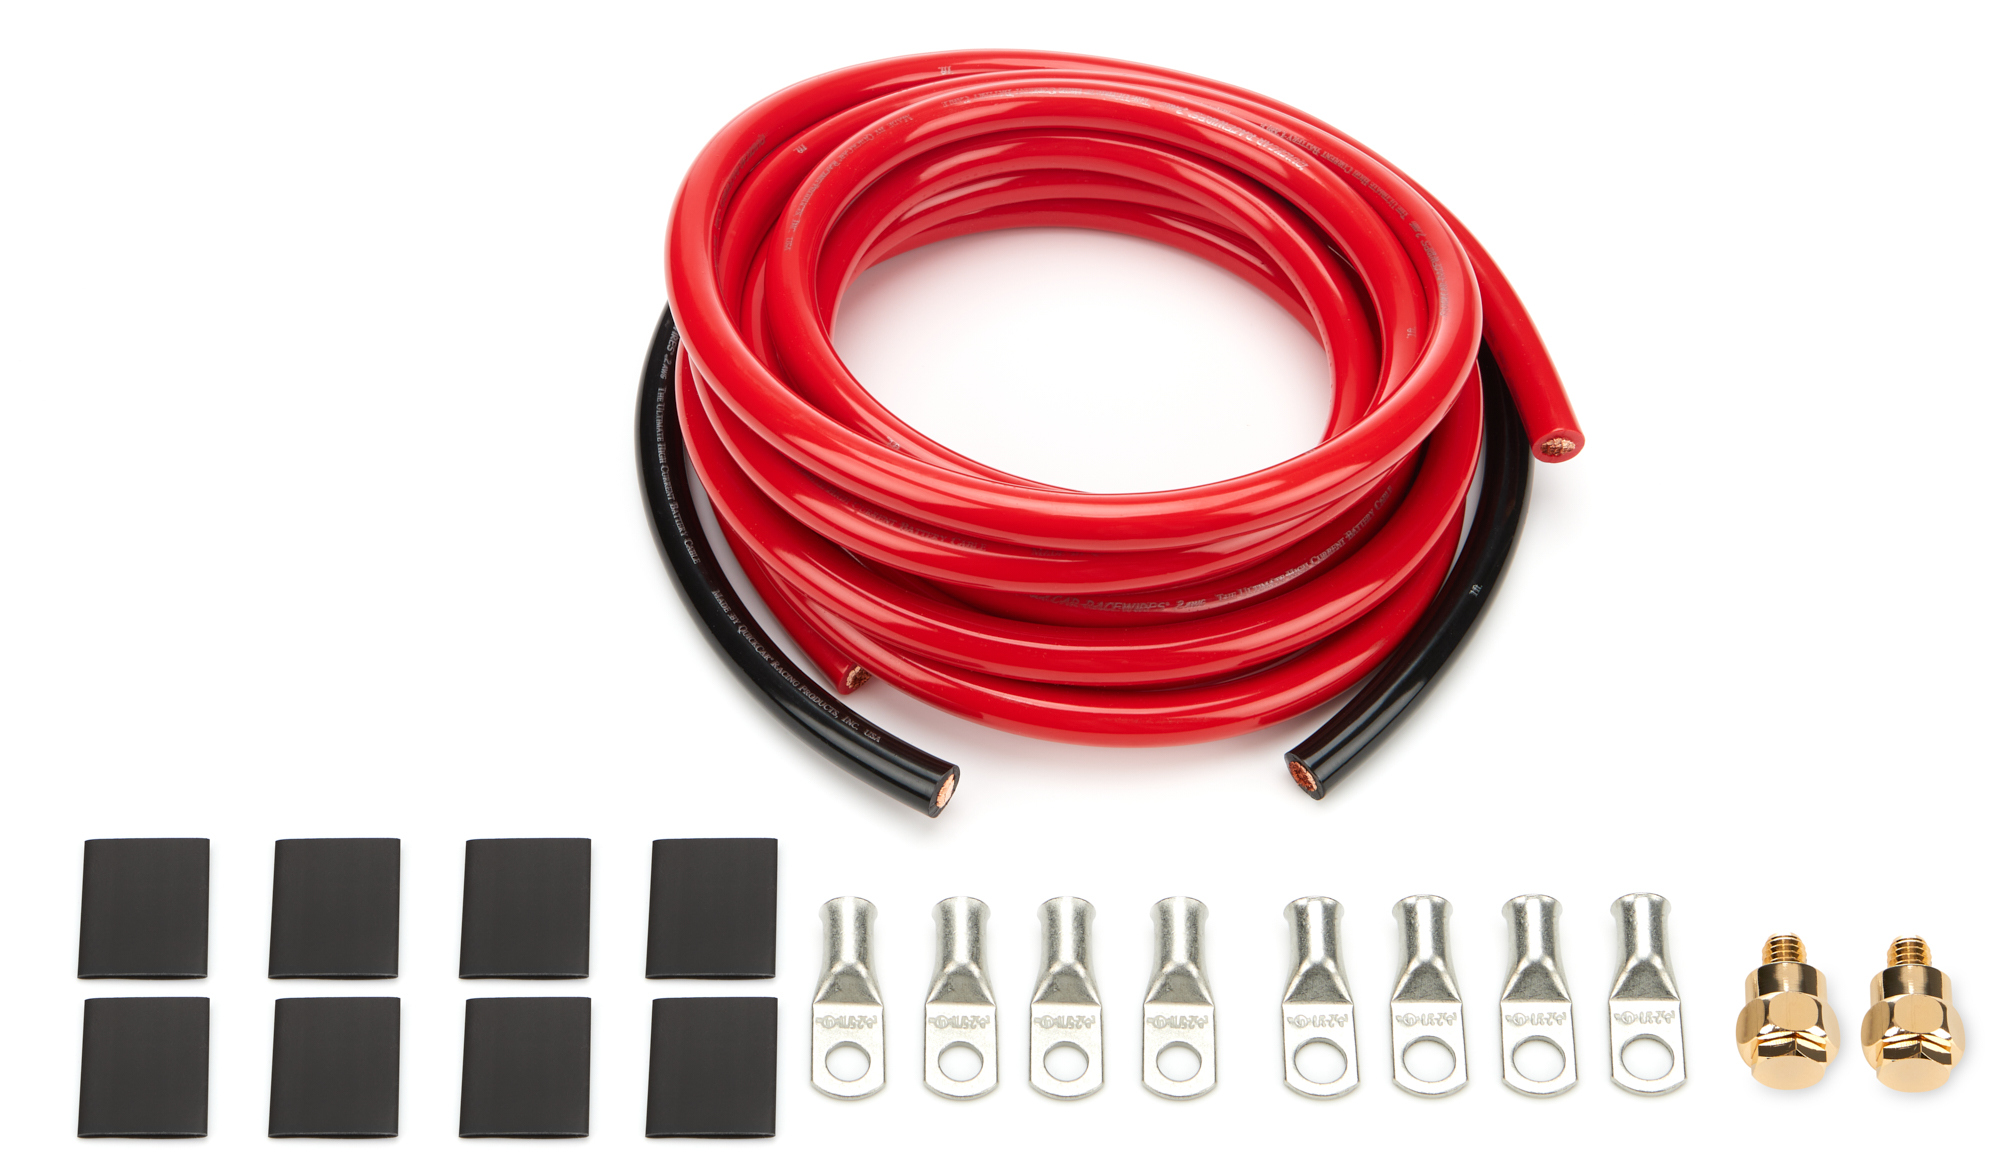 QuickCar 57-011 Battery Cable Kit, 2 Gauge, Side Mount Battery Terminals, Terminals / Heat Shrink Included, Copper, 15 ft Red / 2 ft Black, Kit